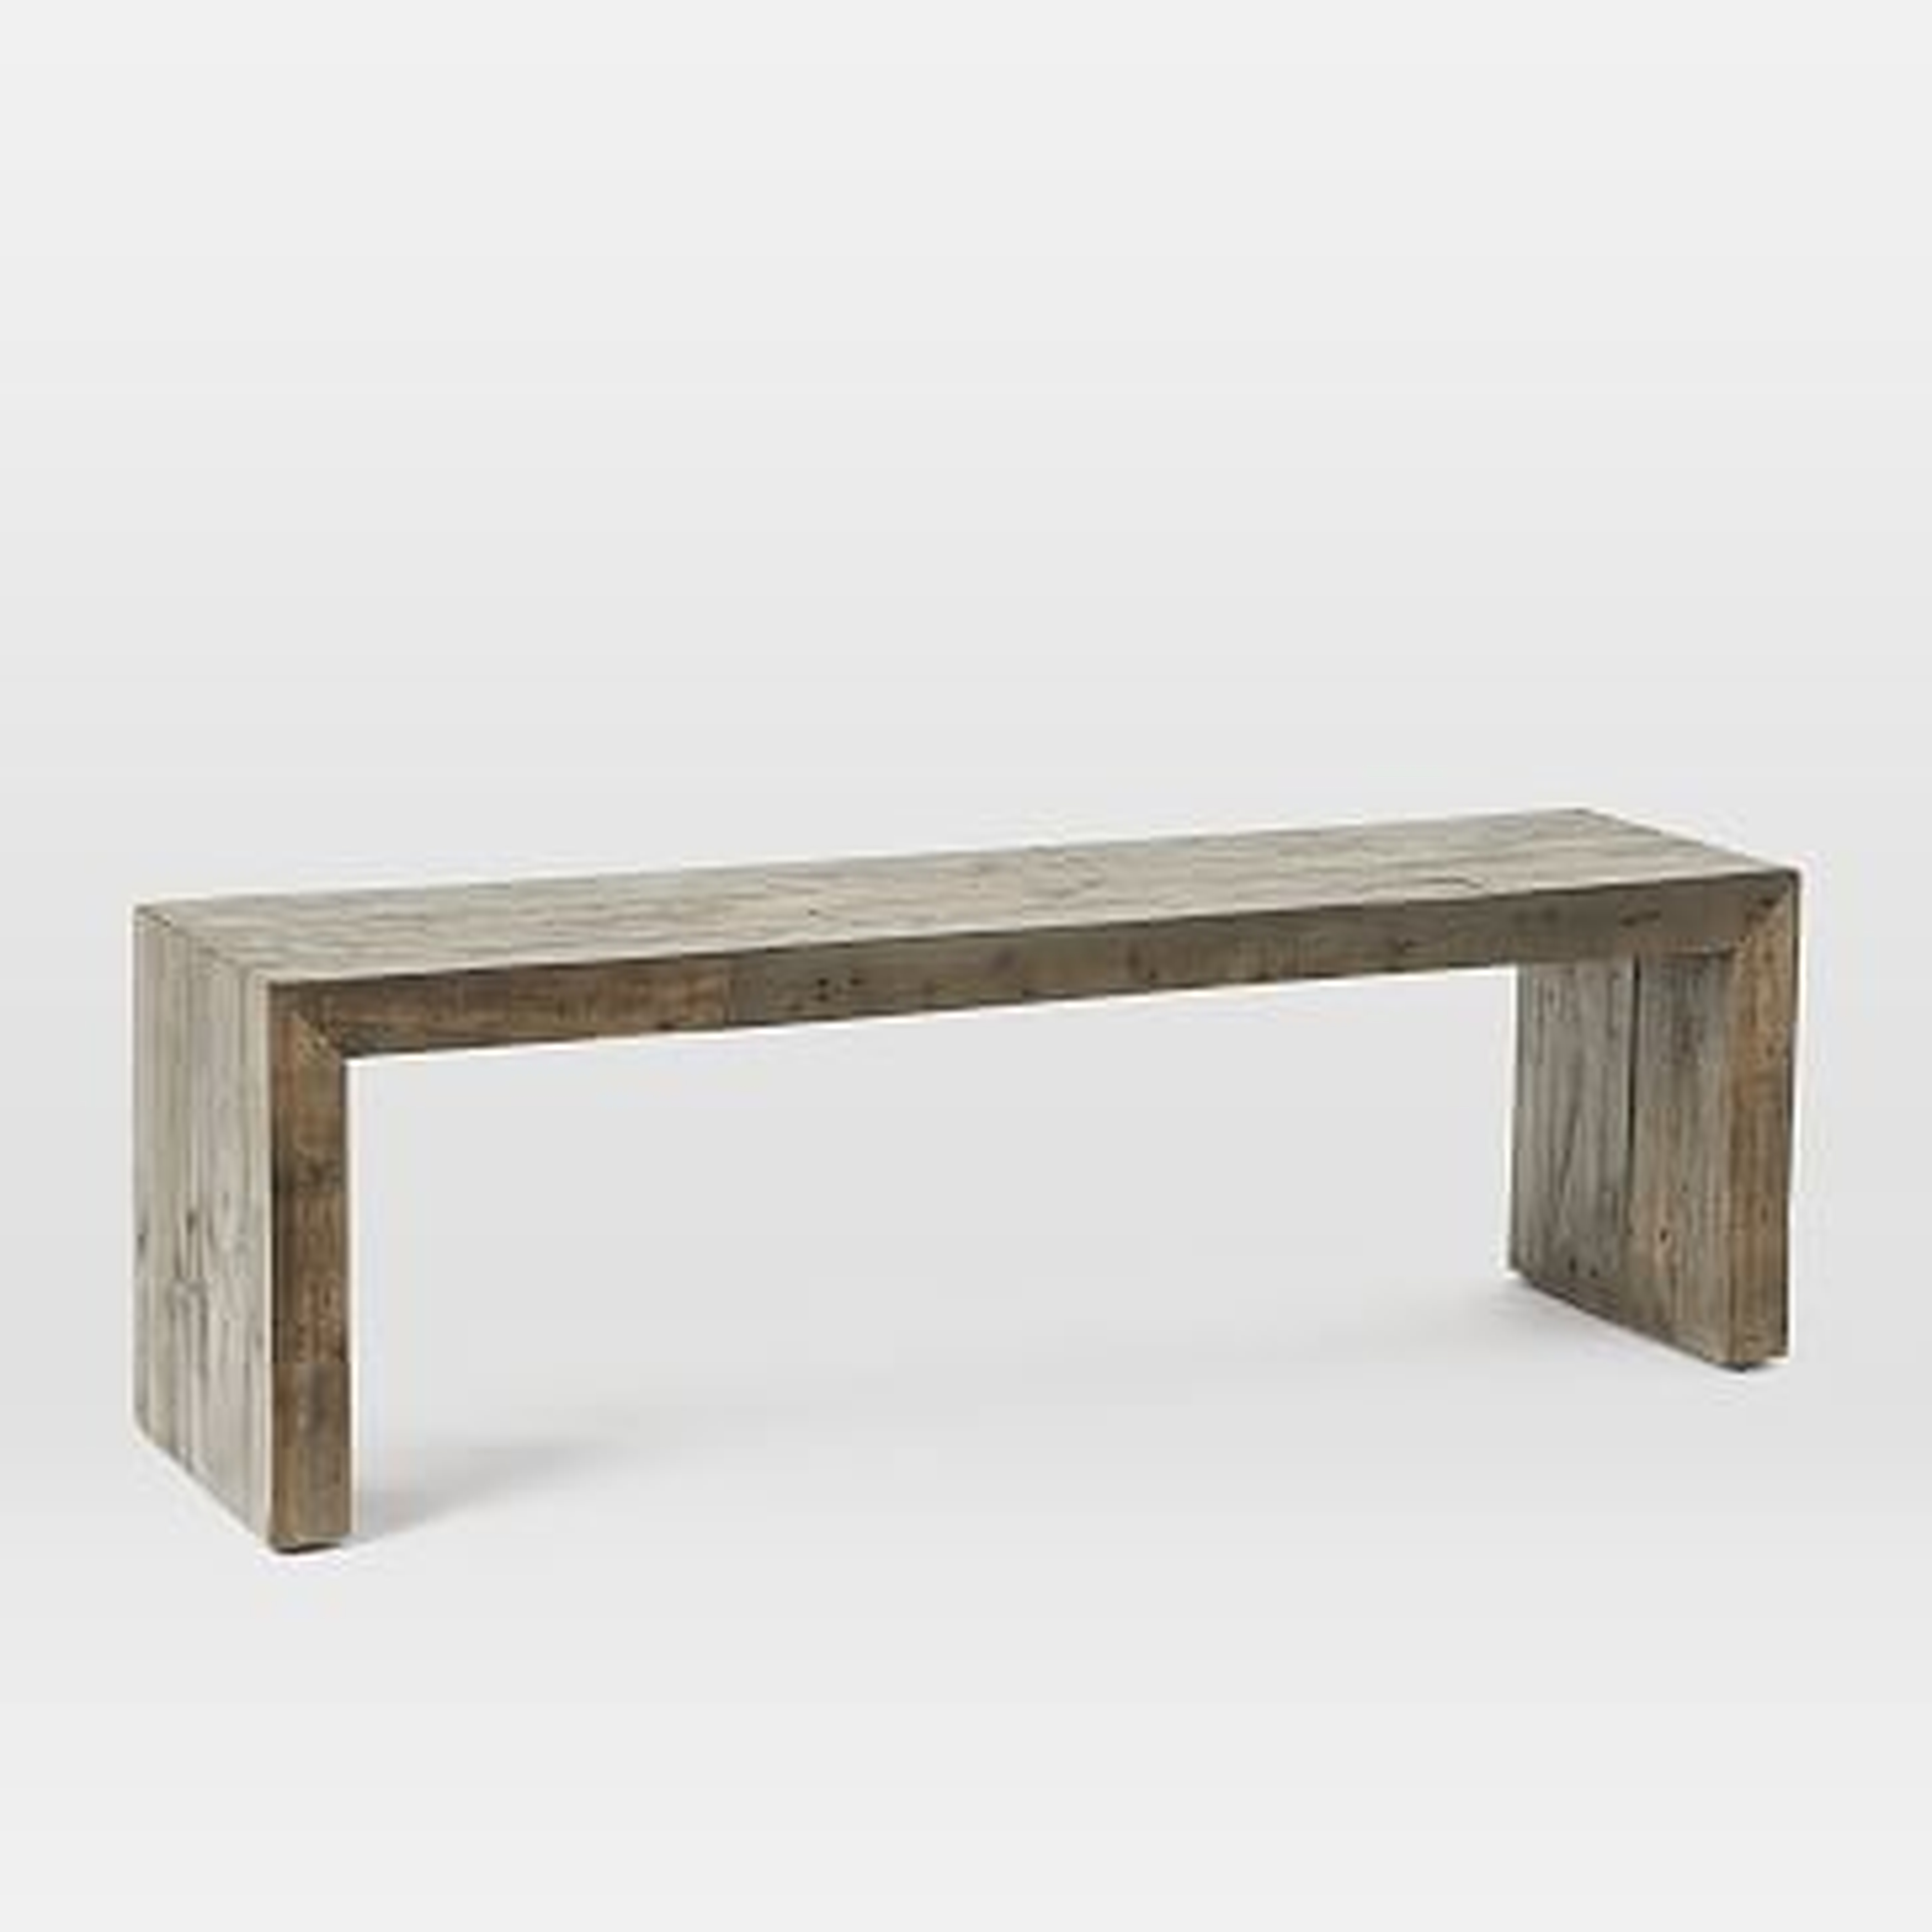 Emmerson® Reclaimed Wood Dining Bench - Stone Gray - West Elm